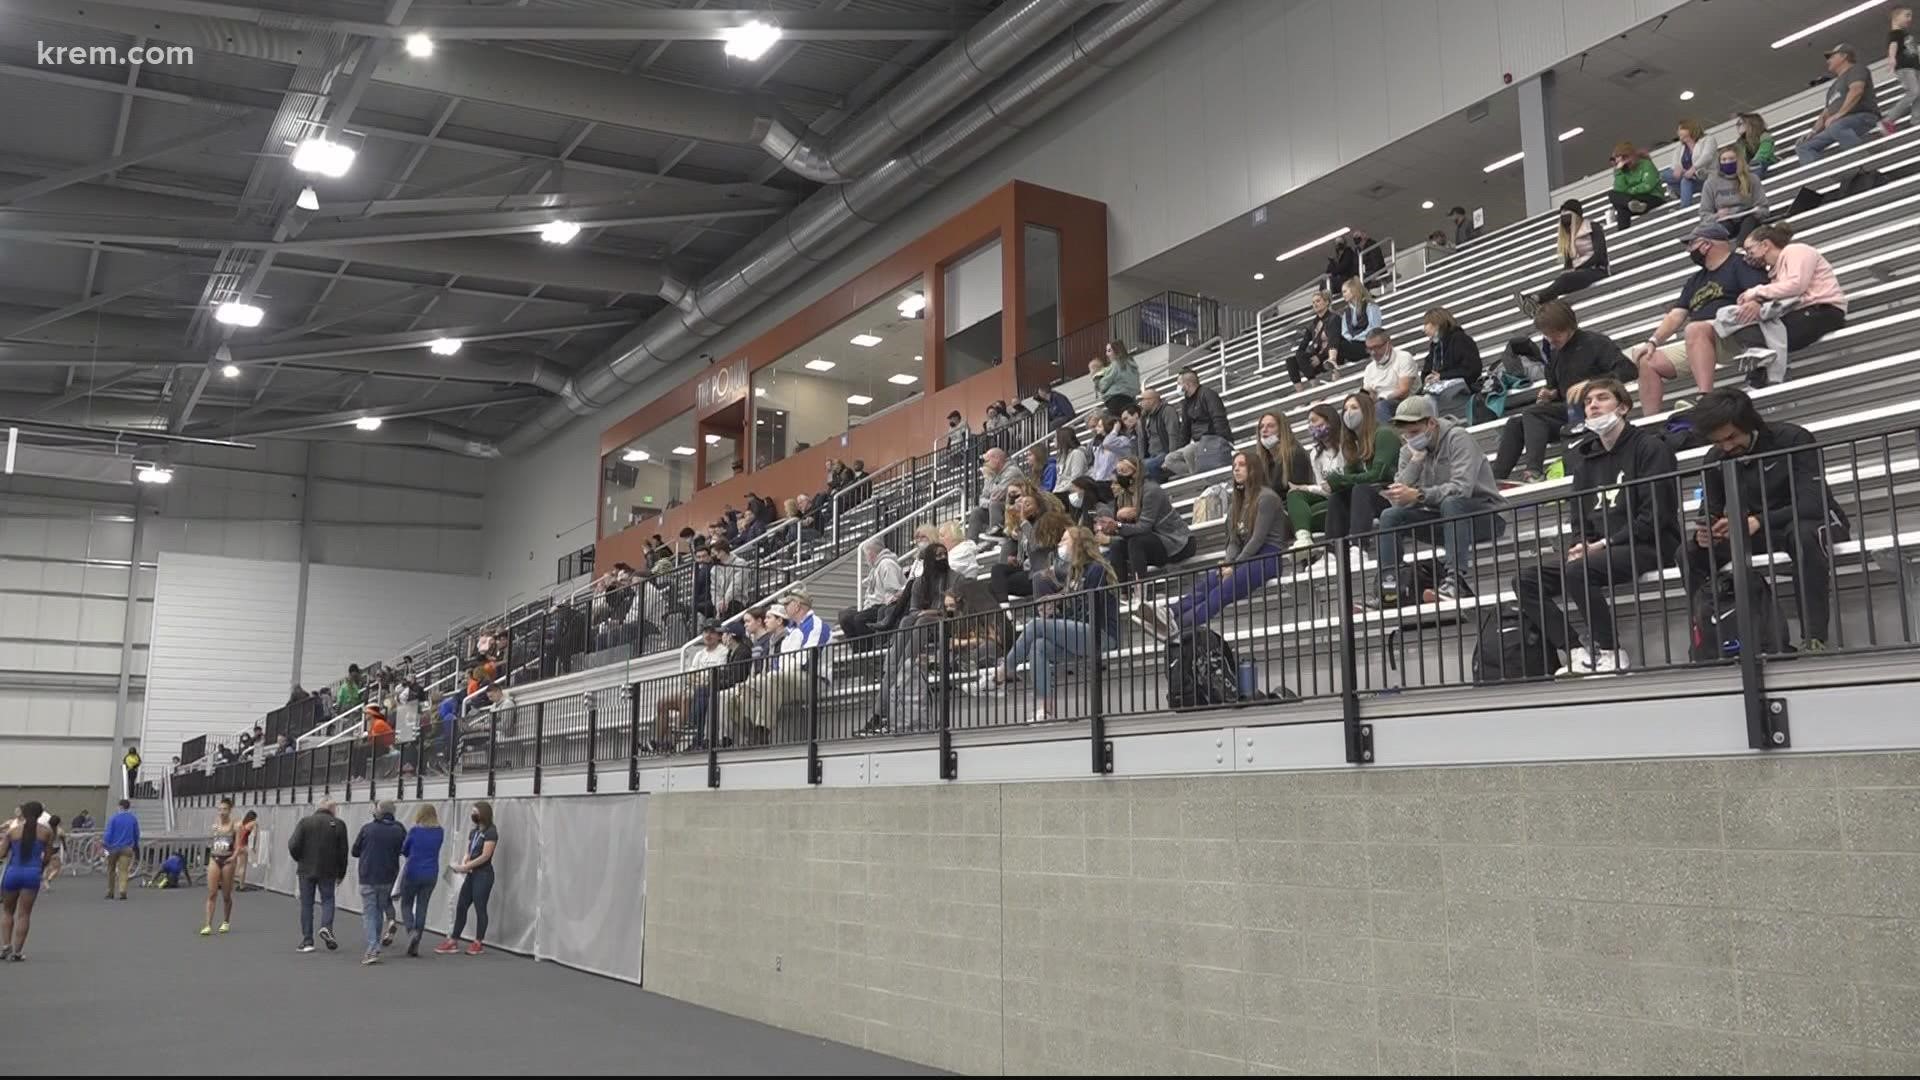 The Spokane Sports vice president said the Podium will help generate $15 million of economic impact during its track and field competition season.